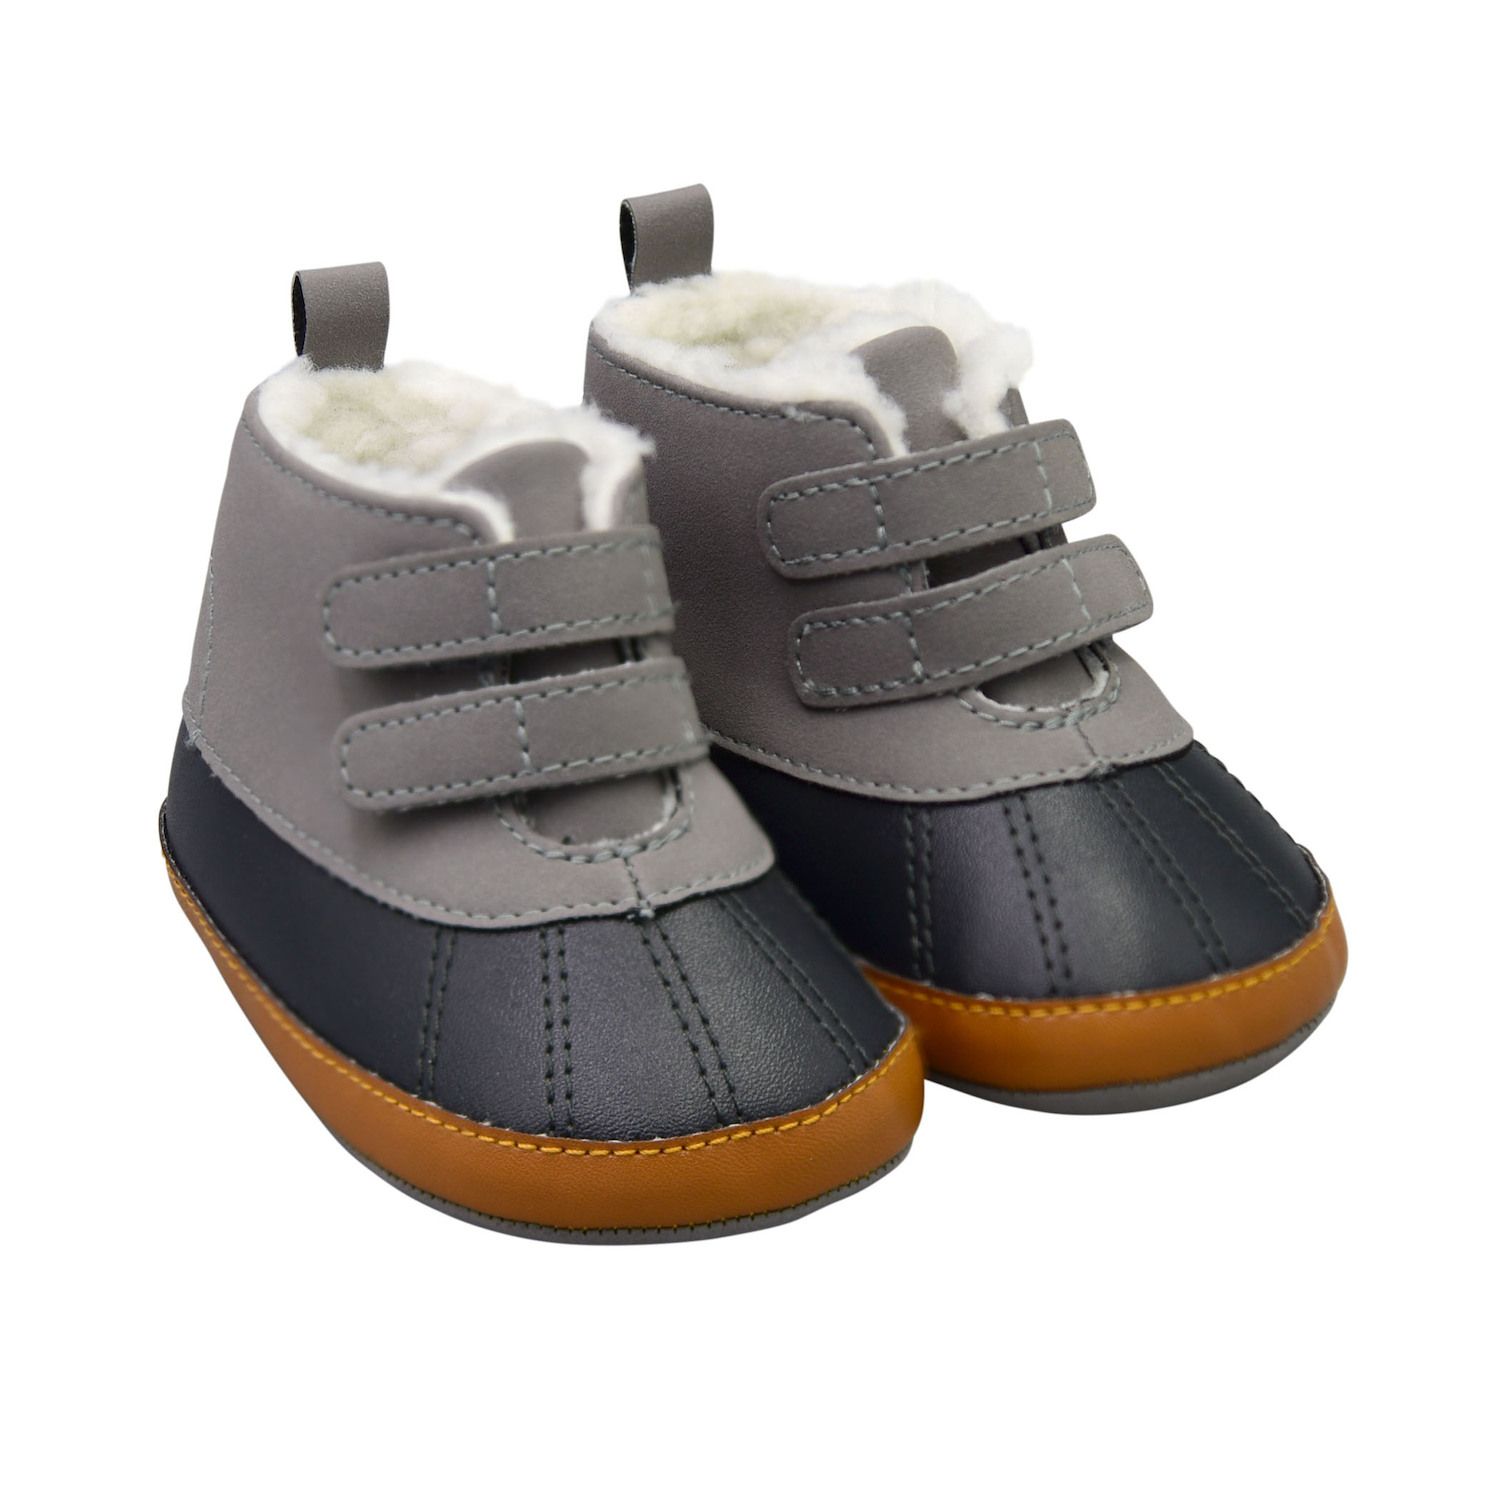 3c baby boy shoes